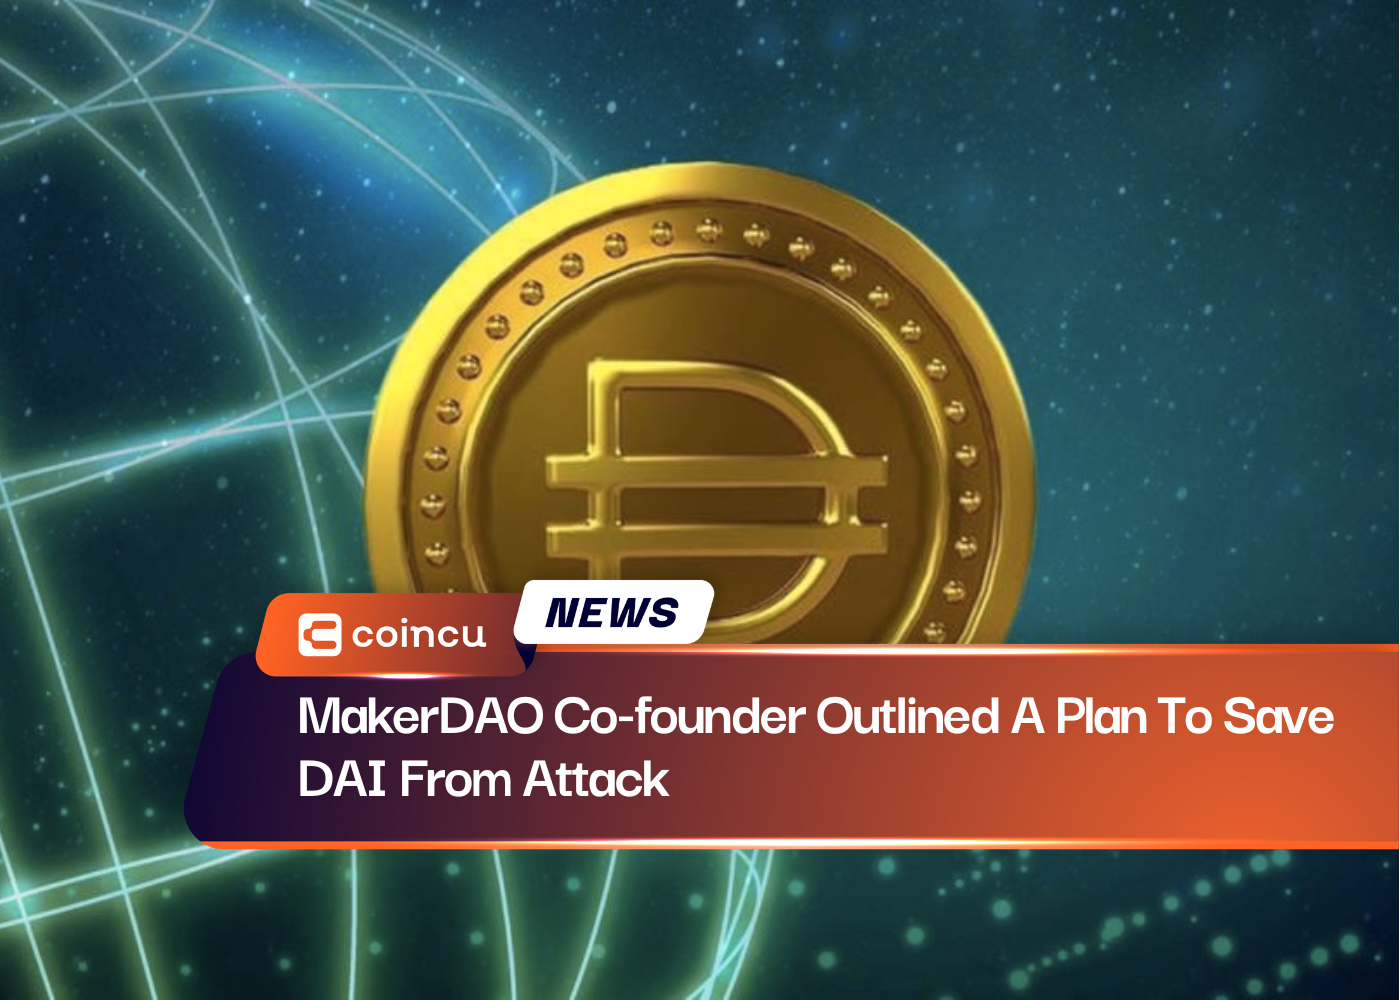 MakerDAO Co-founder Outlined A Plan To Save DAI From Attack